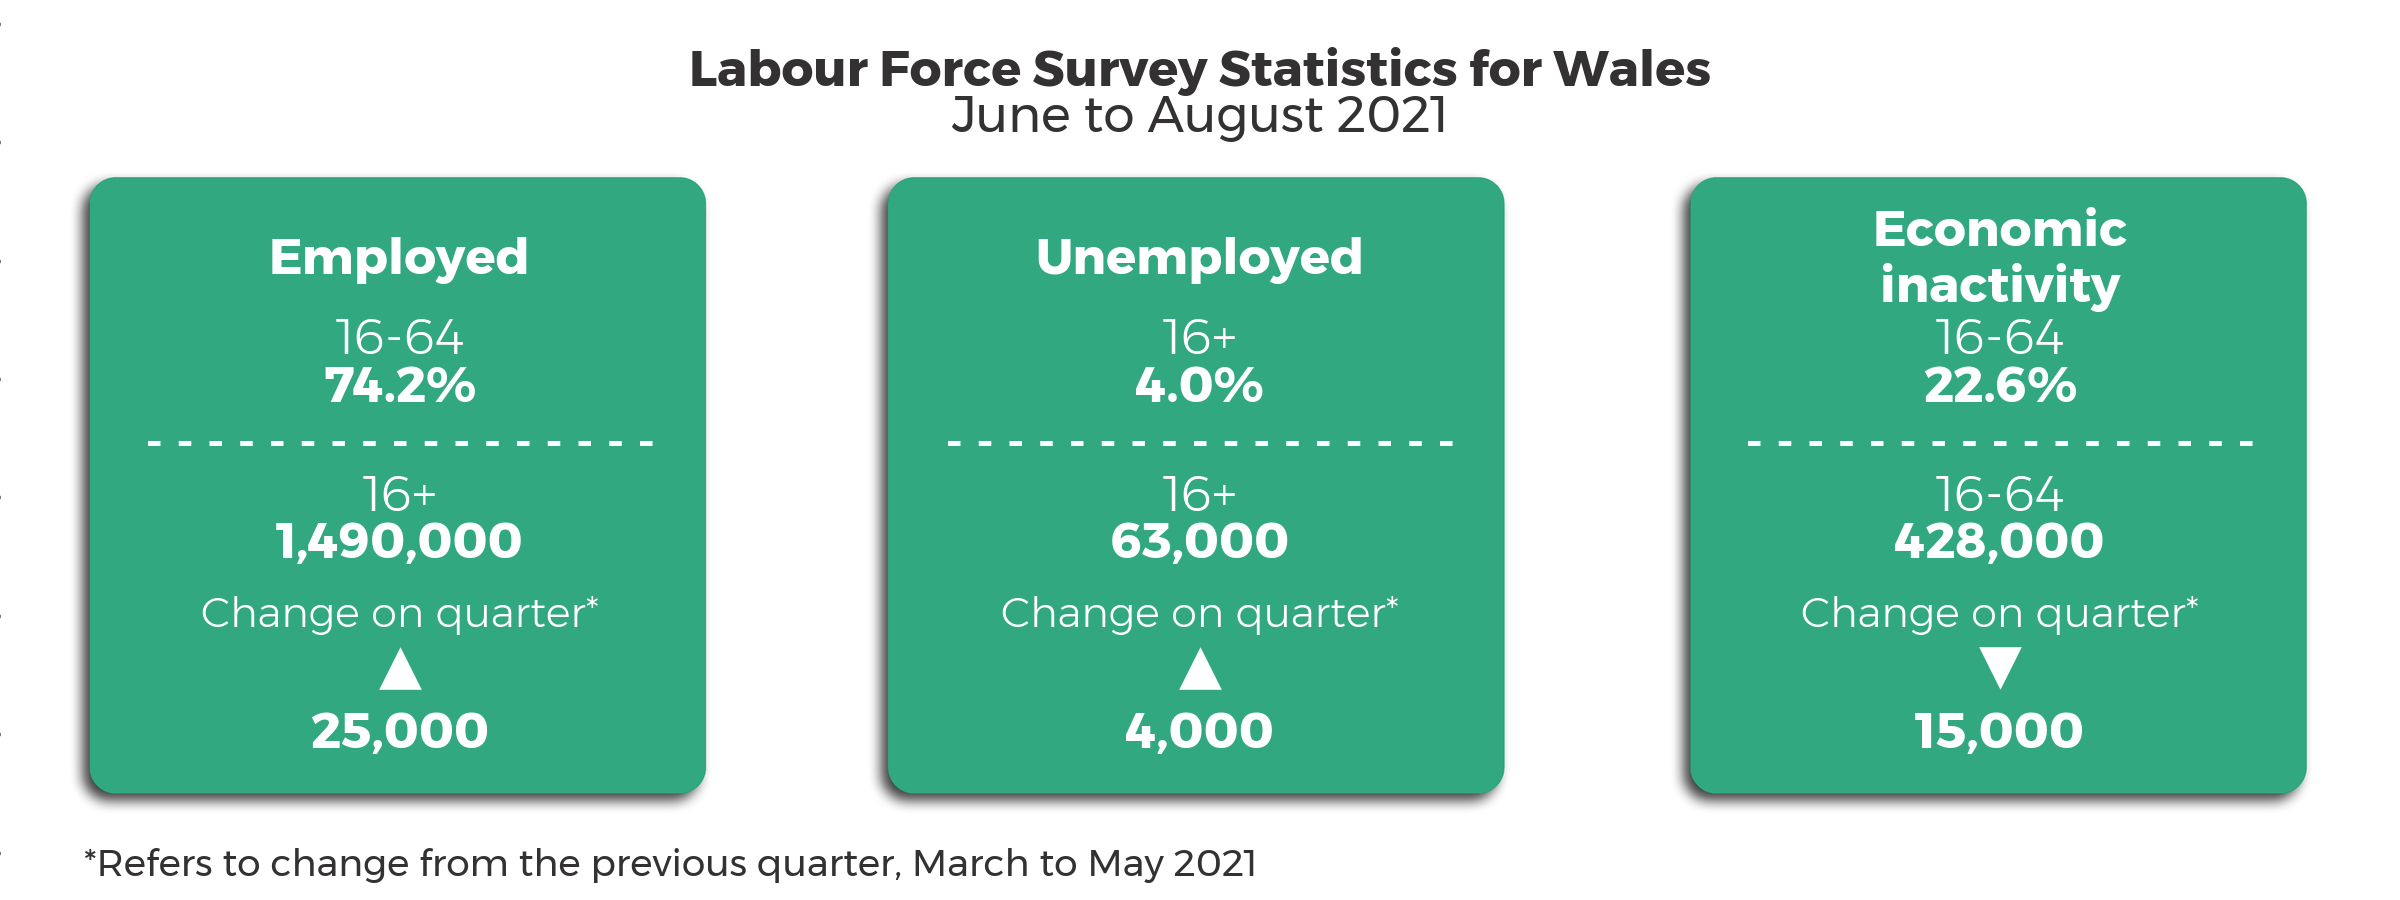 Headline statistics June 2021 to August 2021 compared to the previous quarter March 2021 to May 2021. The 16+ unemployment rate is 4.0% with 63,000 people unemployed, an increase of 4,000 from the previous quarter. The 16-64 employment rate is 74.2%. 1,490,000 people aged 16+ employed, an increase of 25,000 from the previous quarter. The 16-64 economic inactivity rate is 22.6% with 428,000 people economically active, a decrease of 15,000 on the previous quarter.